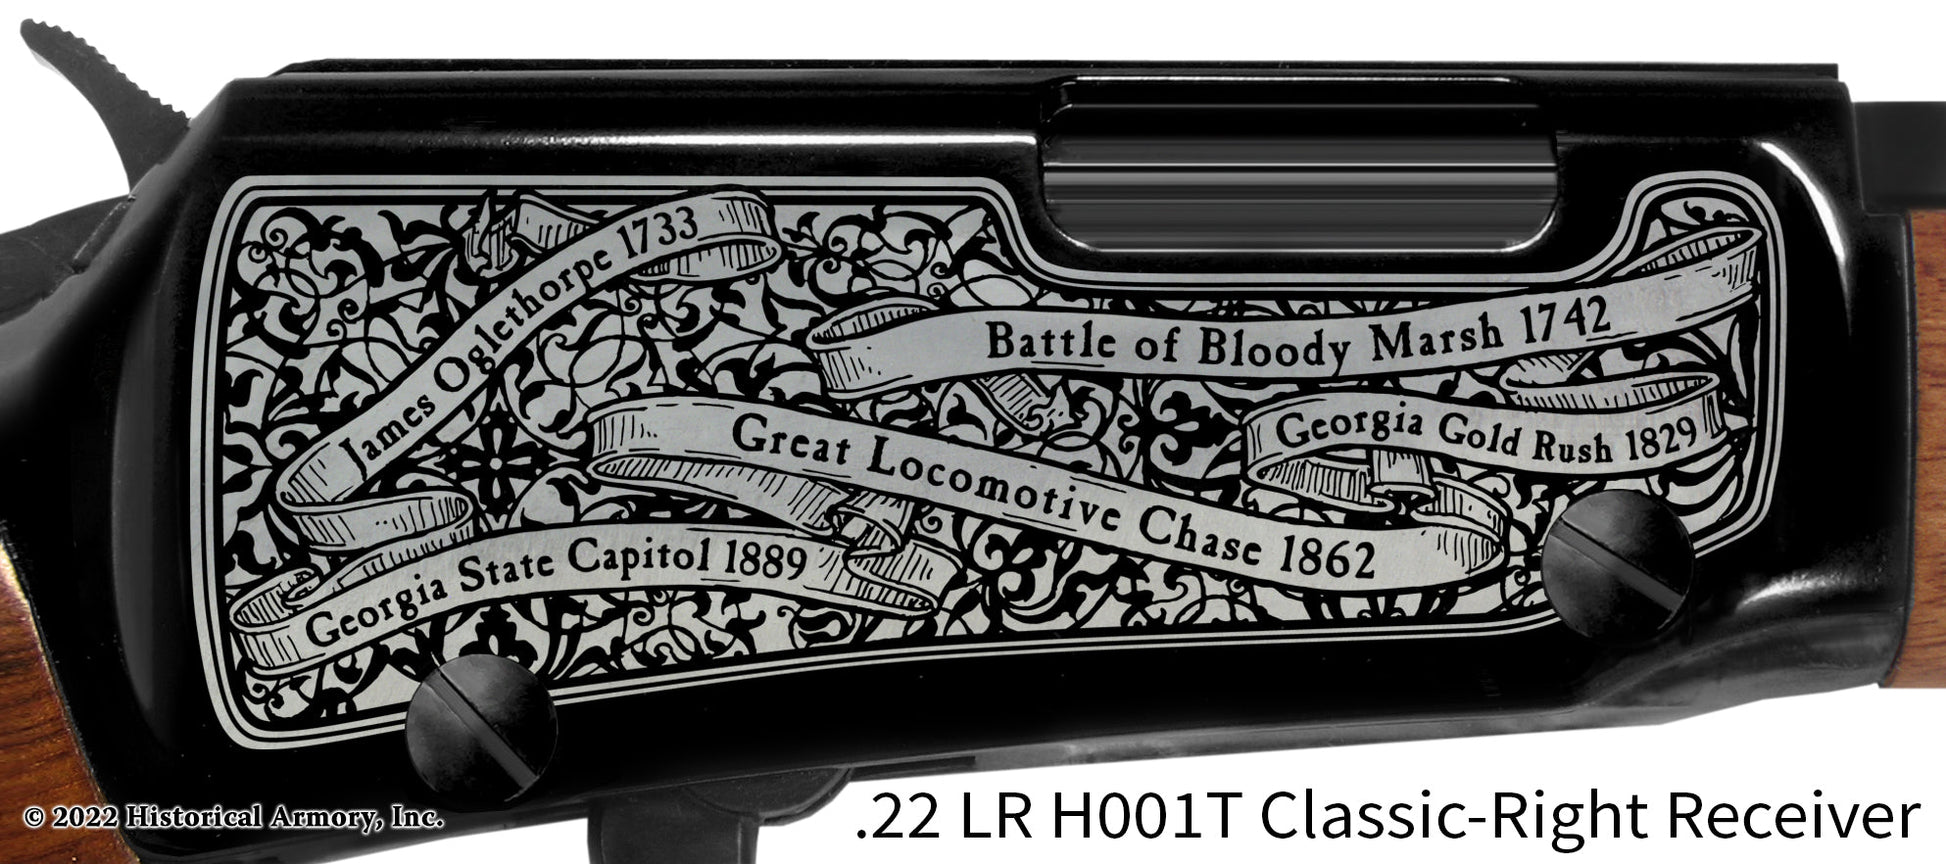 Georgia State Pride Engraved H00T Receiver detail Henry Rifle